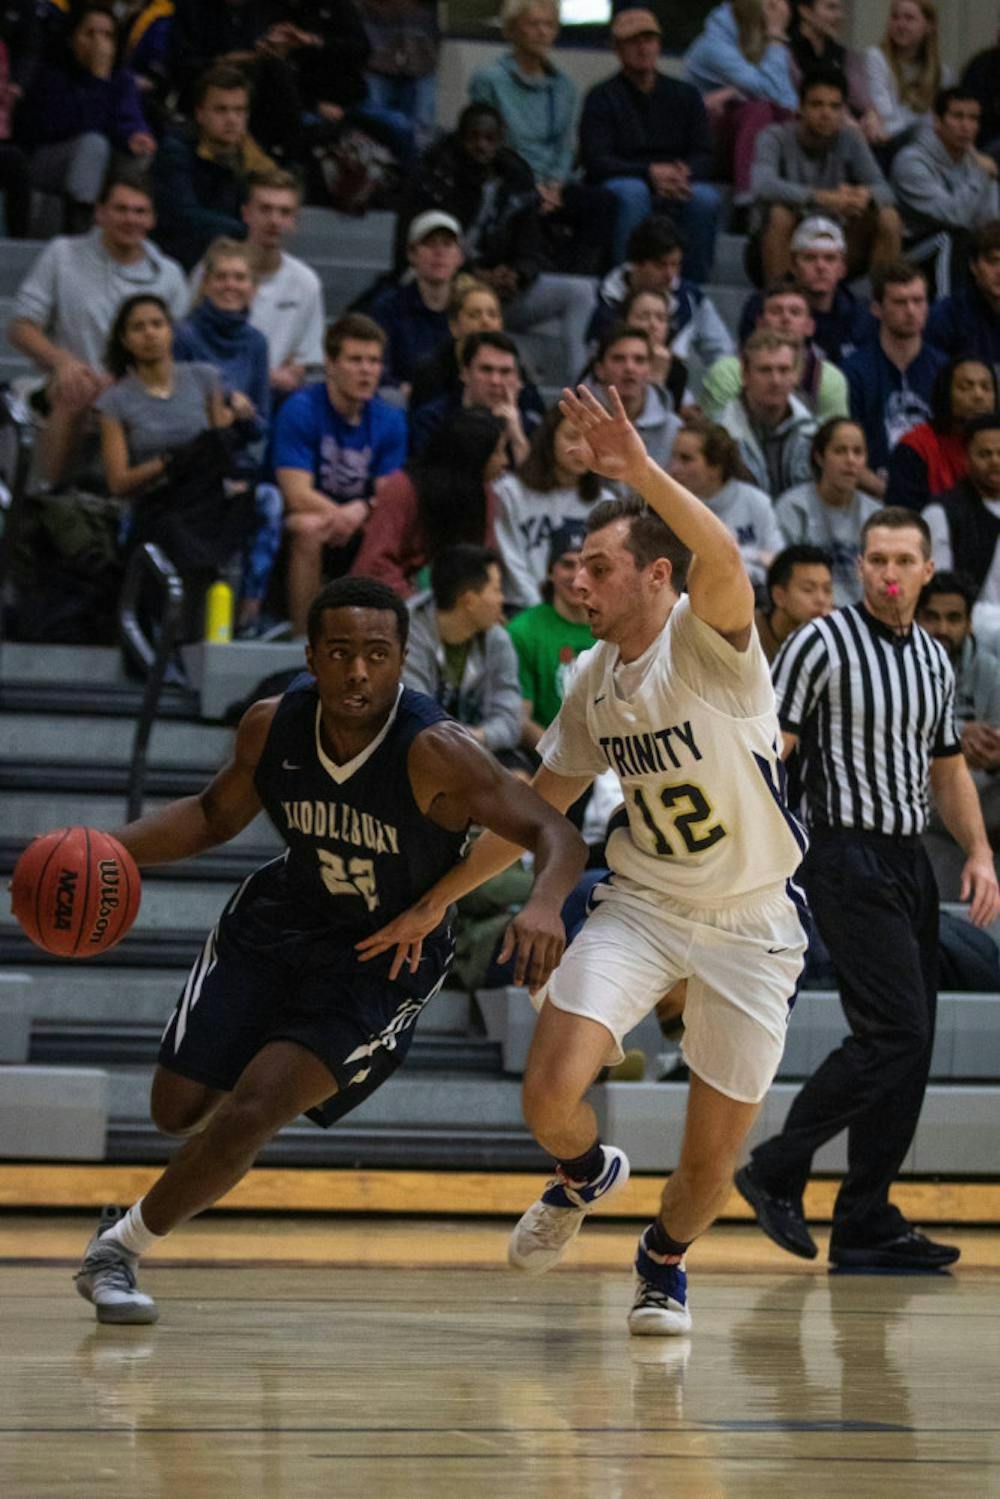 <span class="photocreditinline">MICHAEL BORENSTEIN/THE MIDDLEBURY CAMPUS</span><br />Will Ingram ’21 scans the court for his next move.